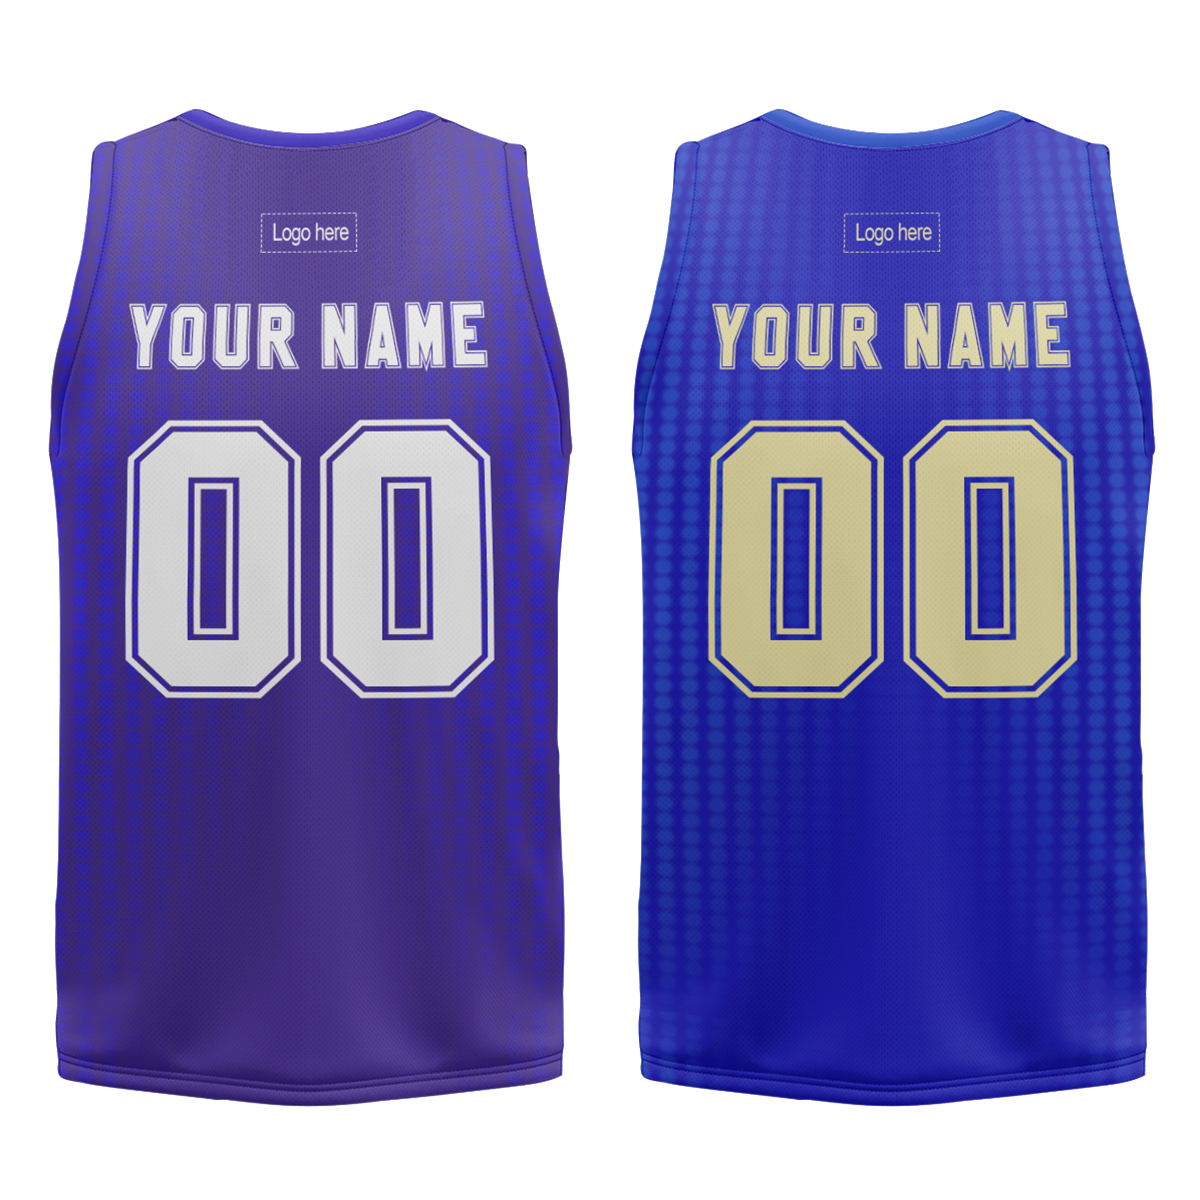 newest-customize-printed-basketball-jersey-design-color-sublimated-basketball-uniforms-set-at-cj-pod-6